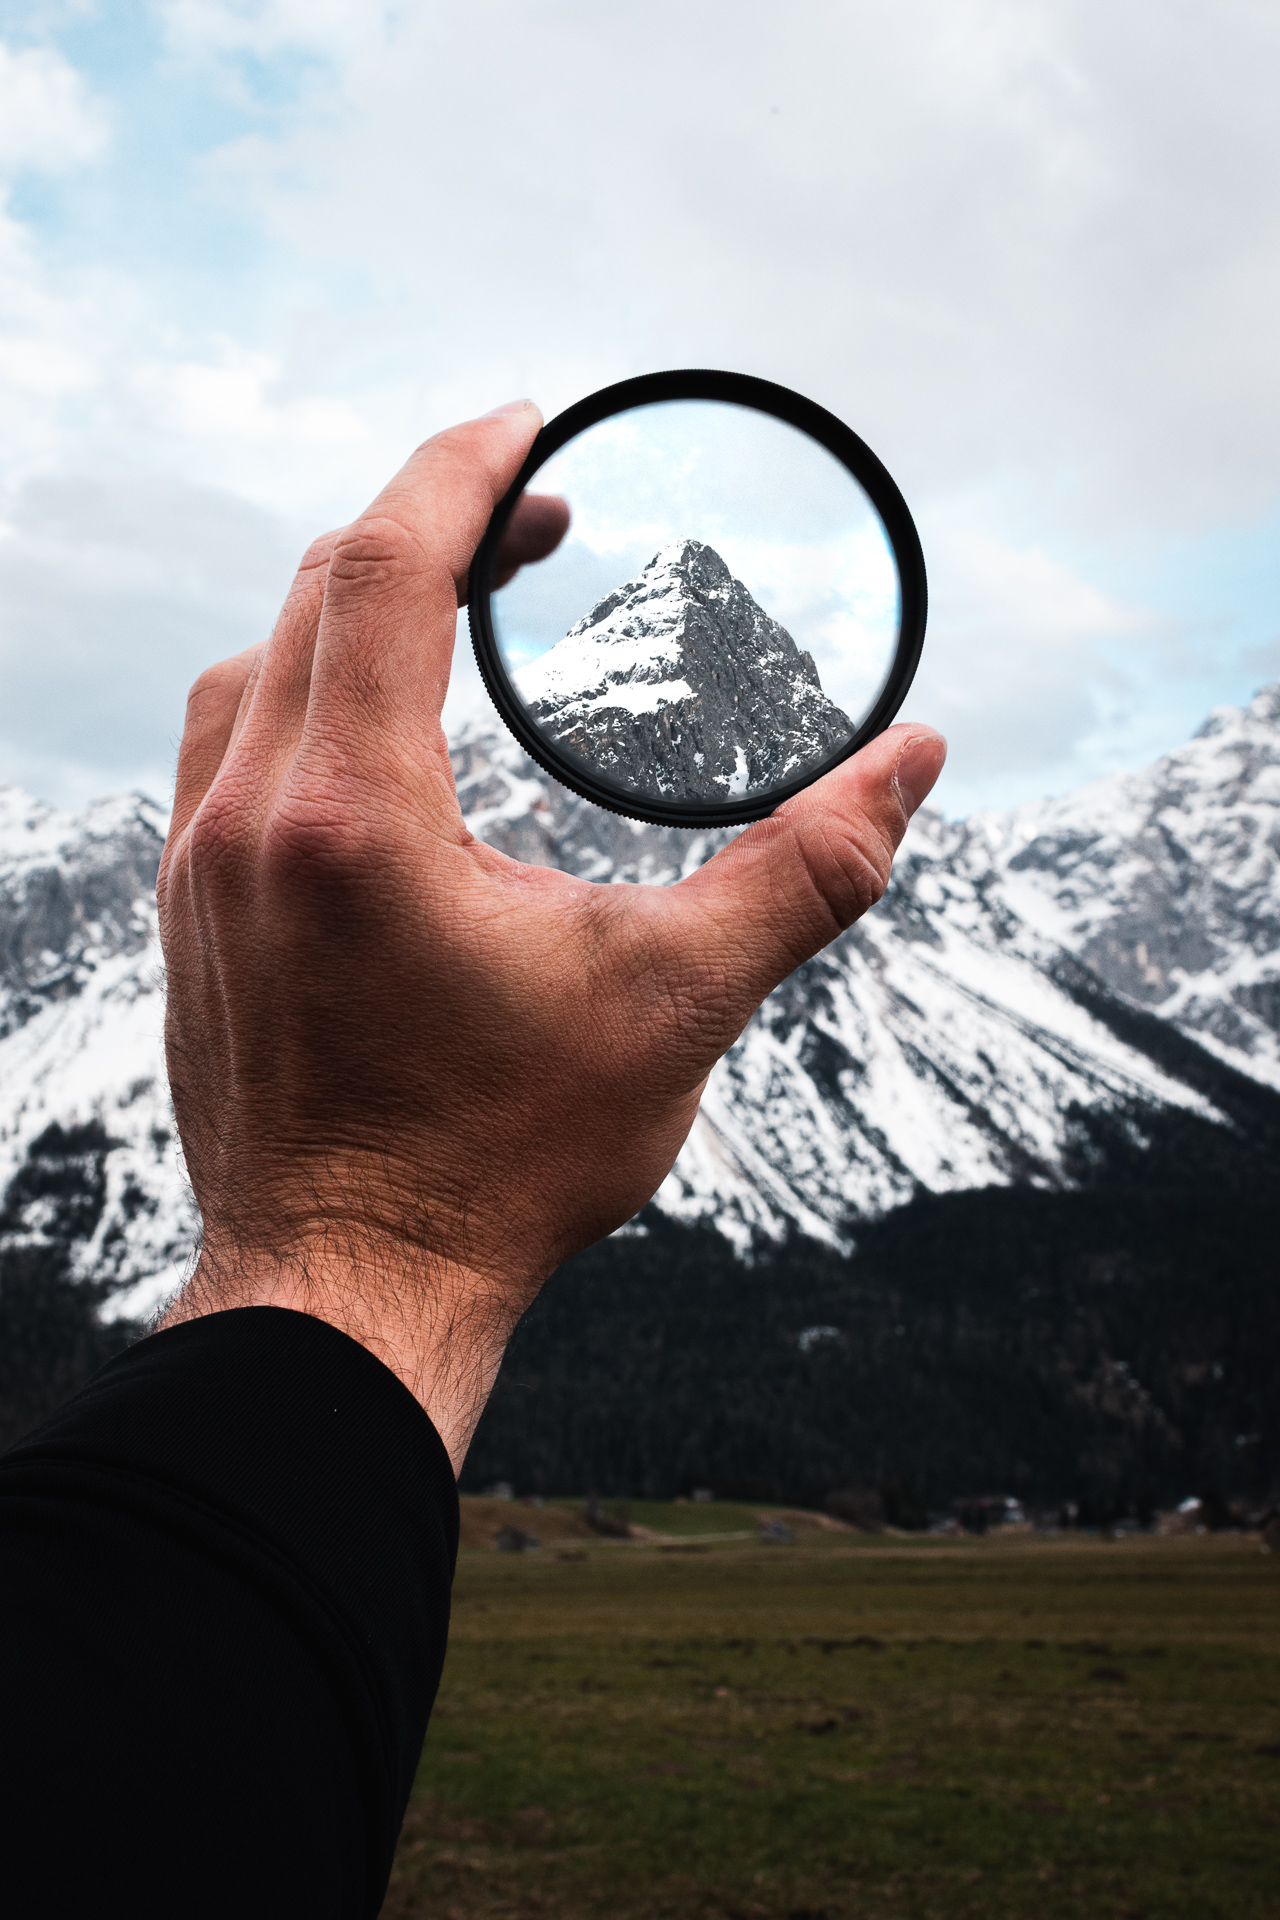 Photo of a neustral density filter aimed at Sonnenspitze, Austria.